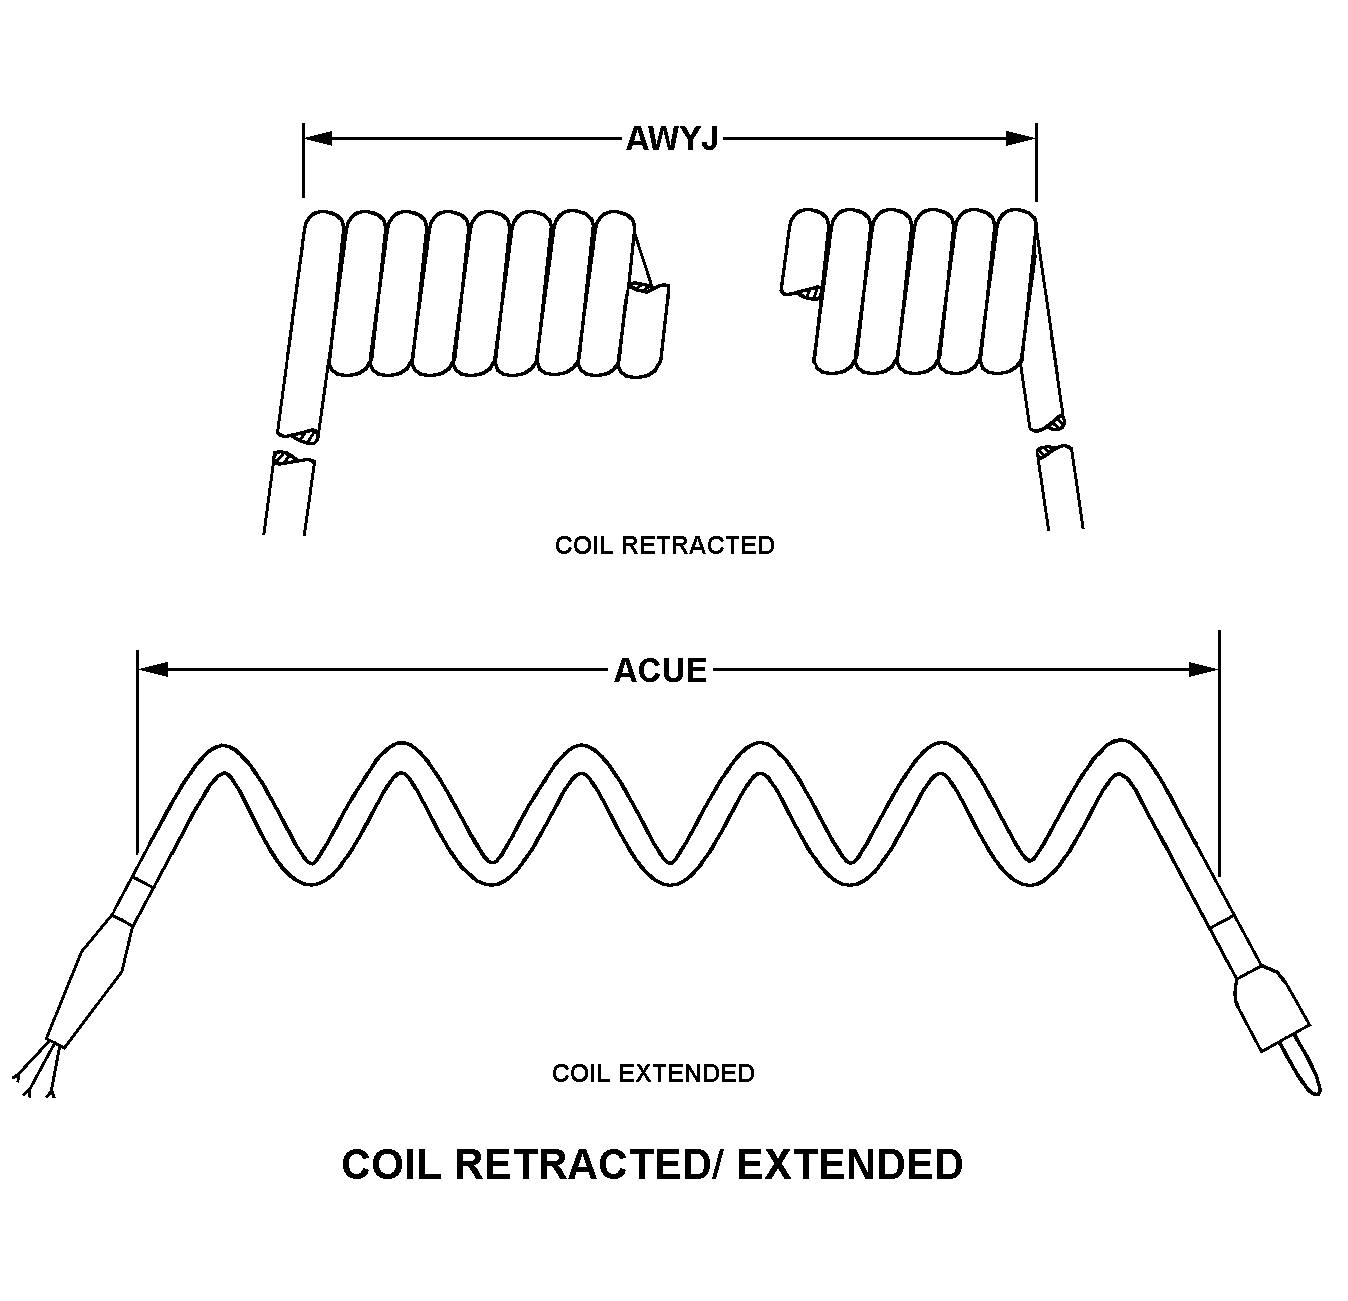 COIL RETRACTED/EXTENDED style nsn 5995-01-207-3067